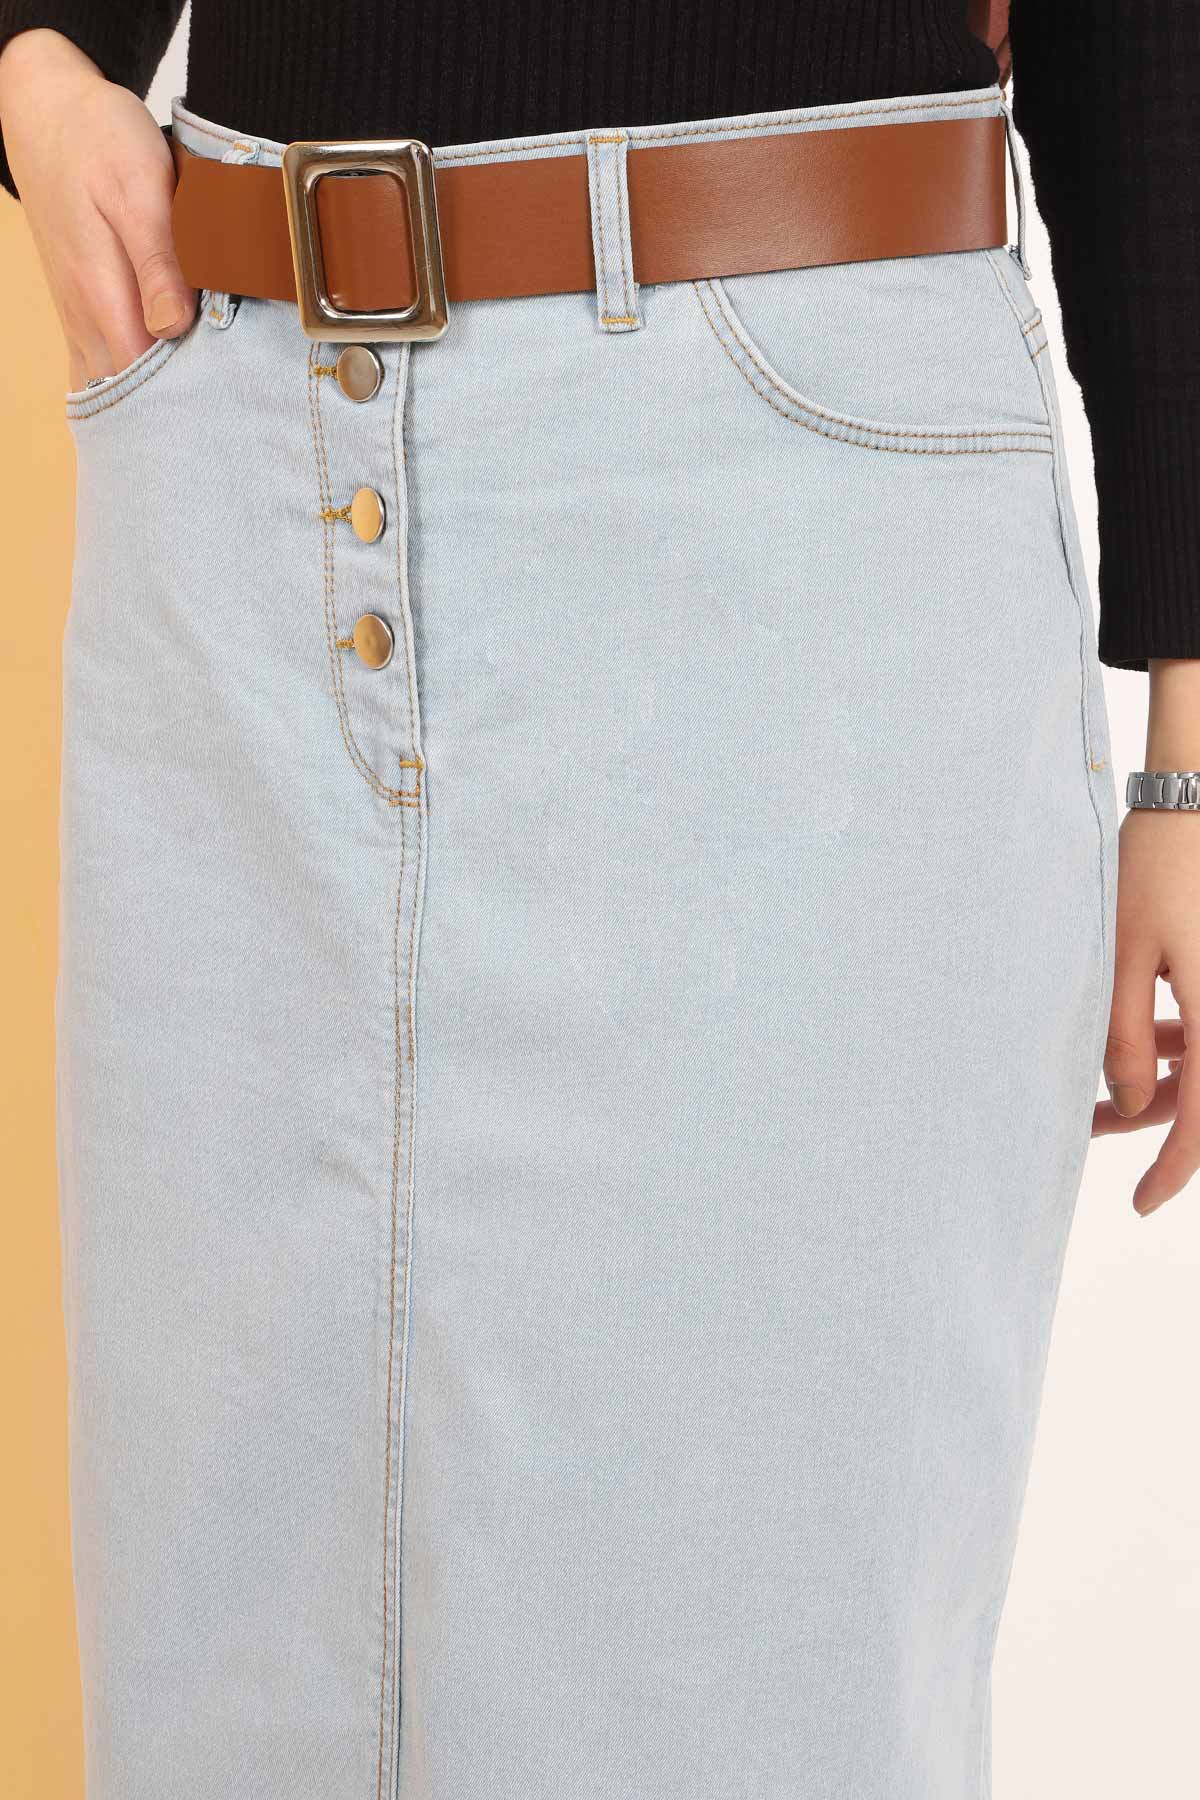 Arched Jeans Skirt TSD22018 Light blue